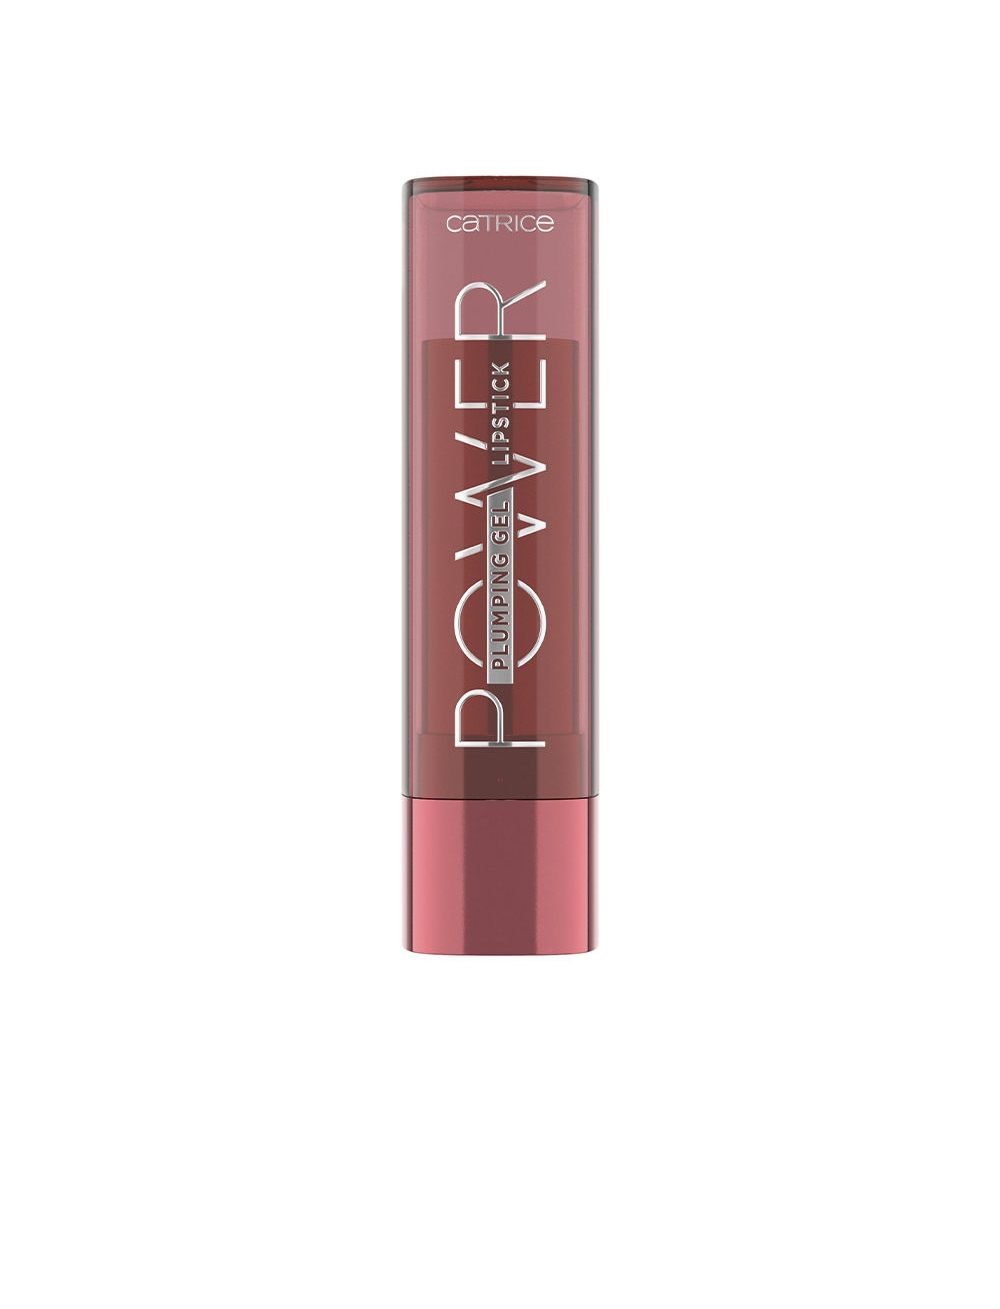 Catrice flower & herb edition power plumping gel lipstick #030-rosa